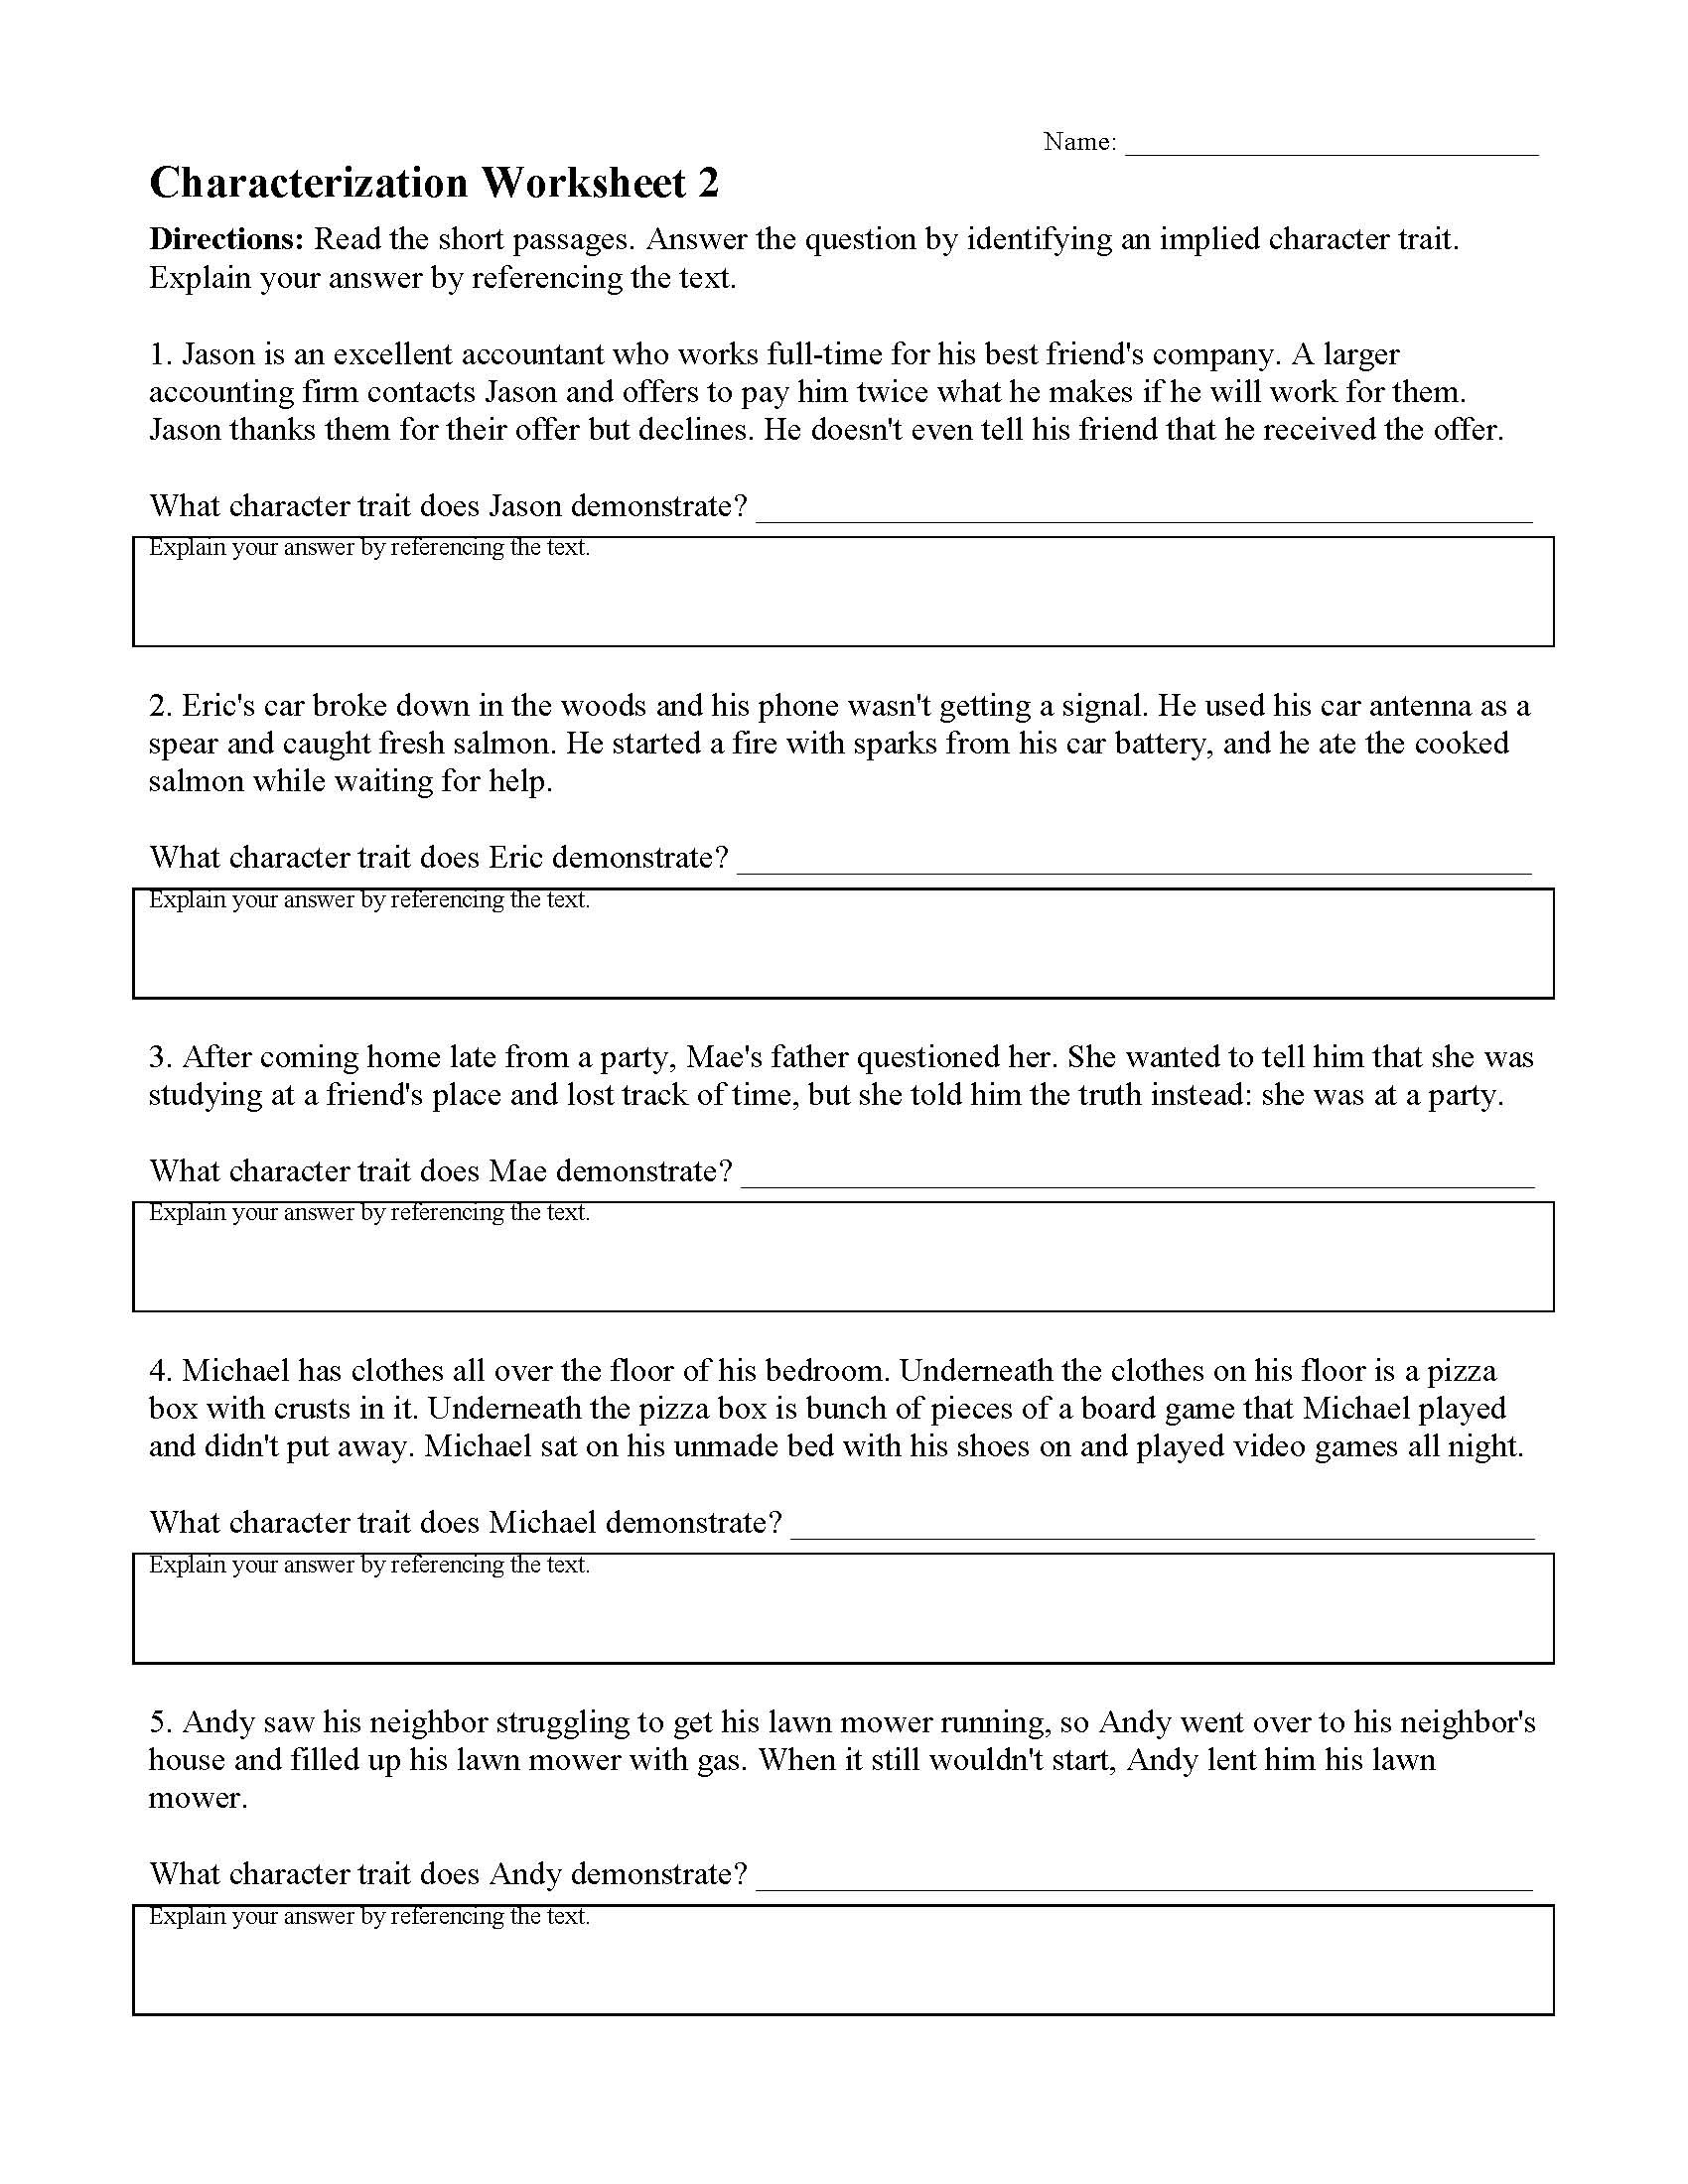 Direct and Indirect Characterization Worksheet Characterization Worksheets